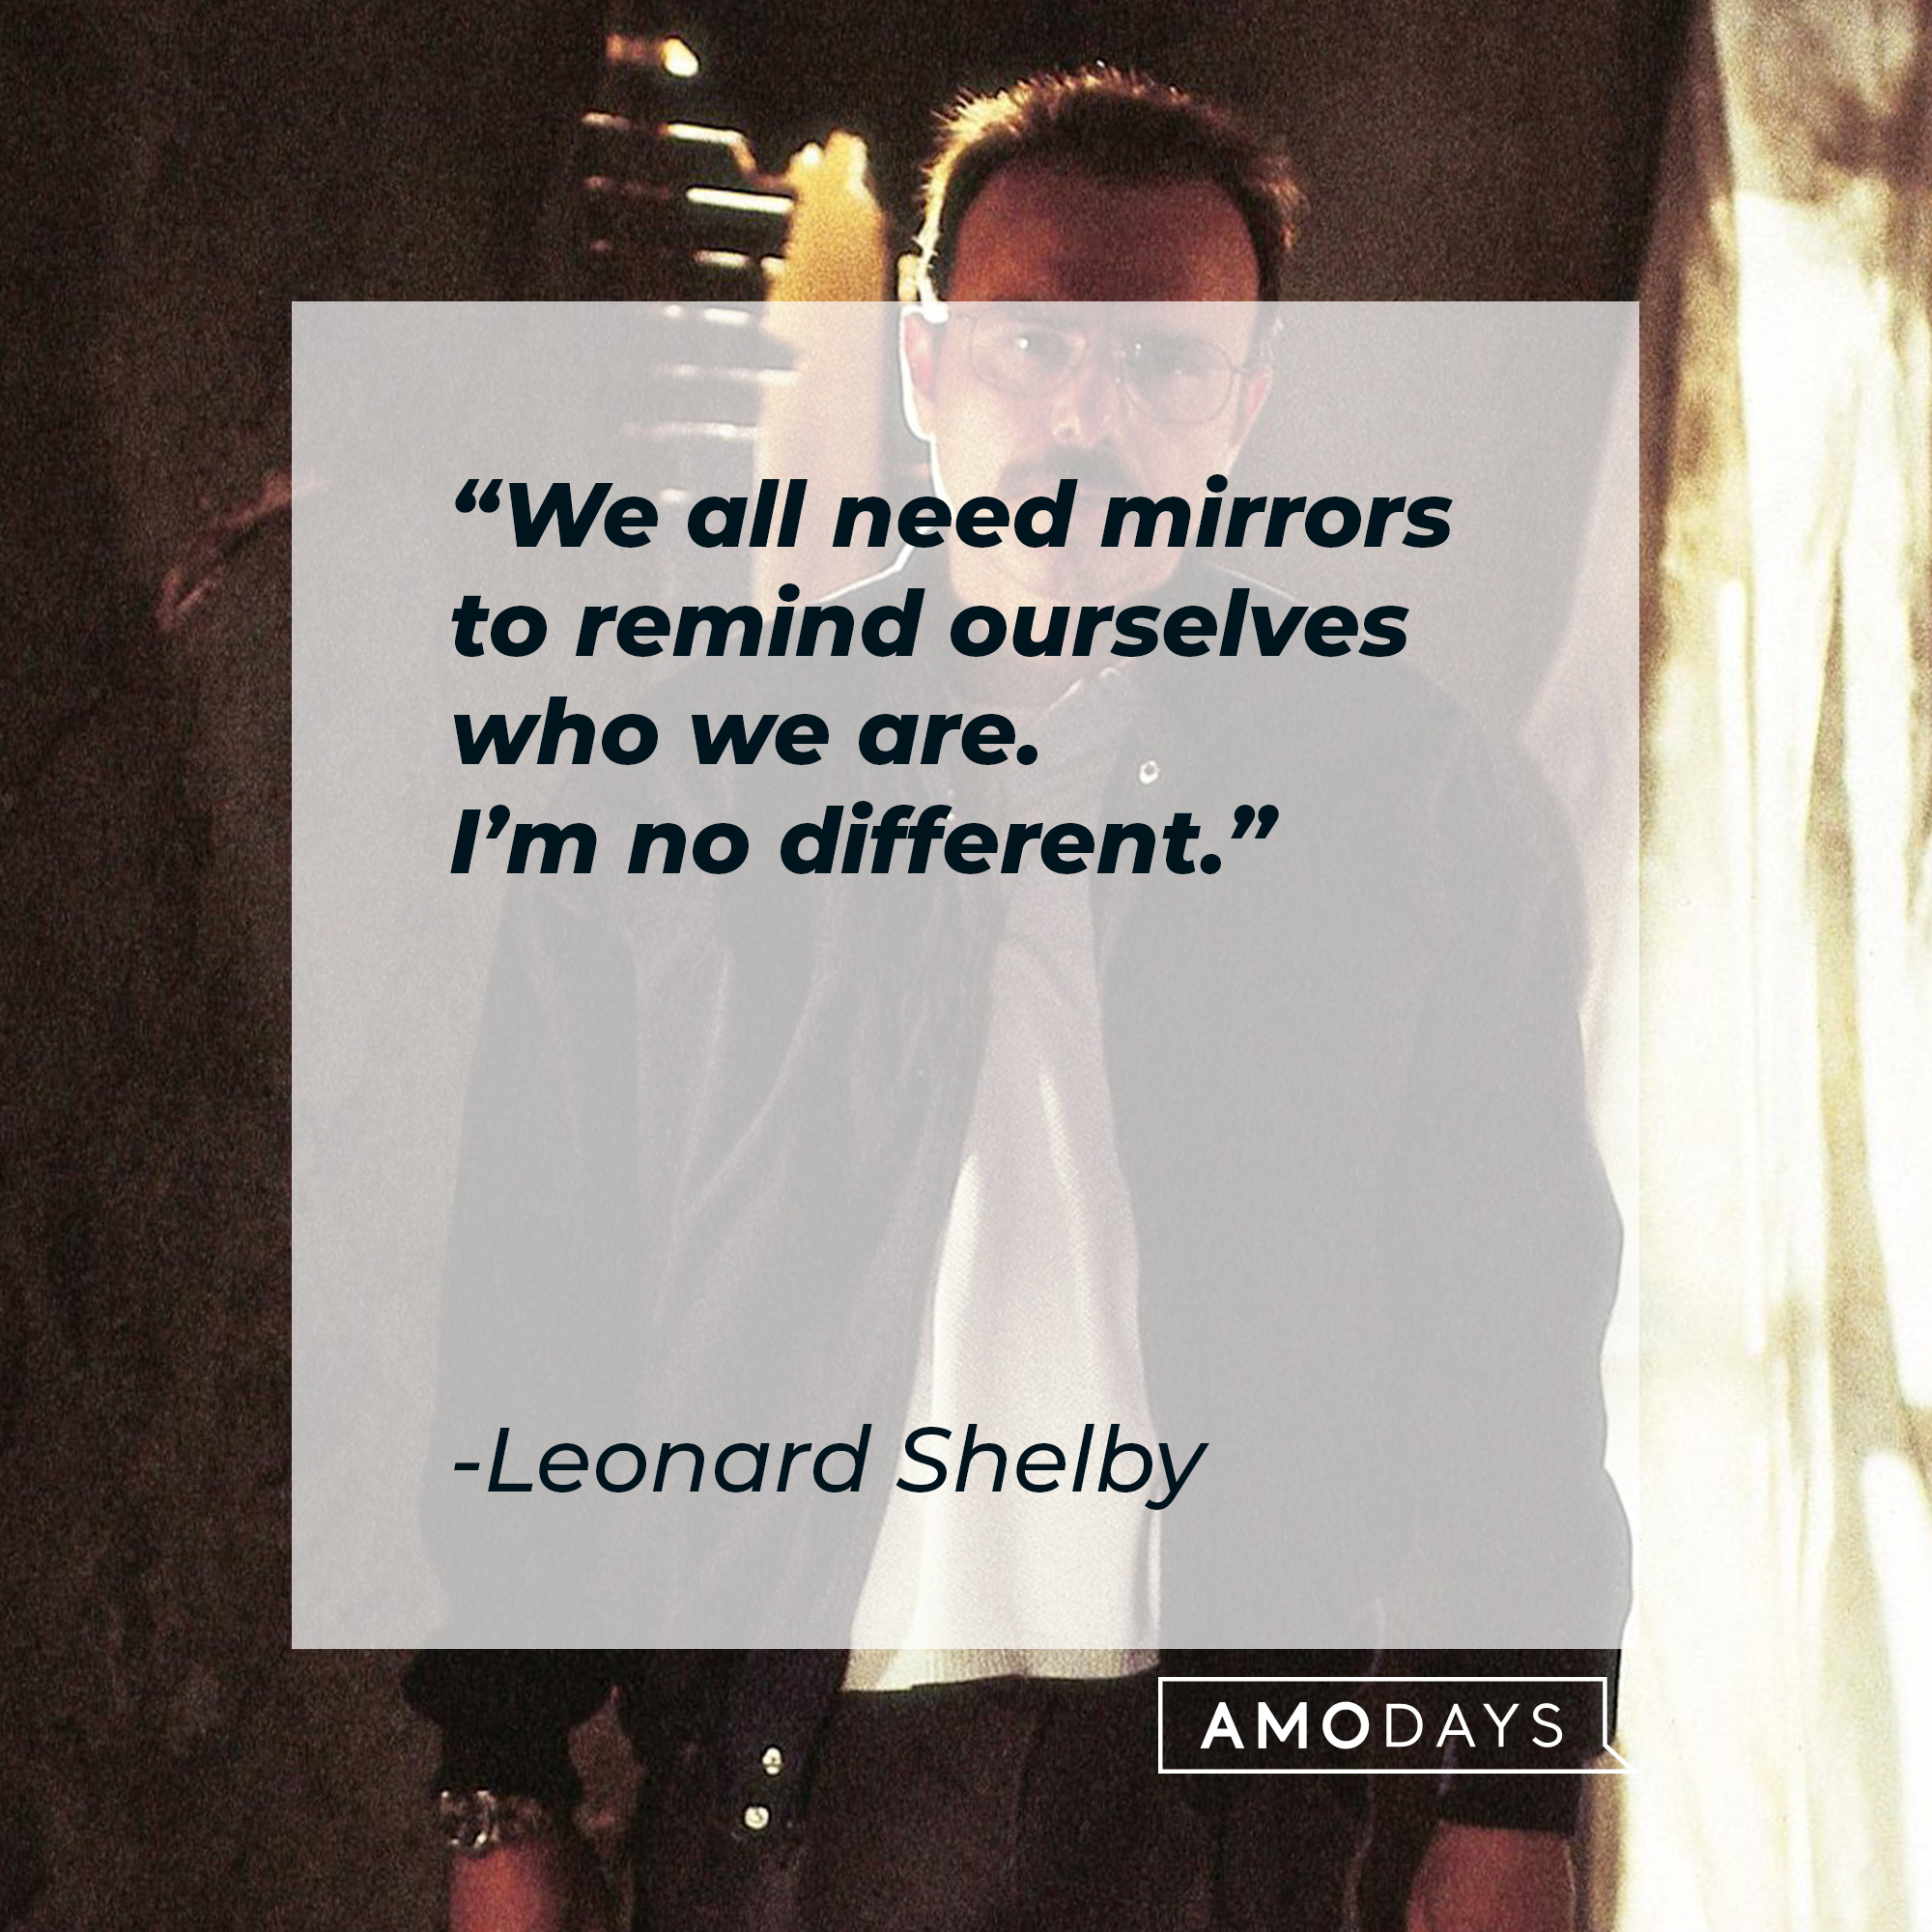 Leonard Shelby's quote: "We all need mirrors to remind ourselves who we are. I'm not different." | Source: facebook.com/MementoOfficial